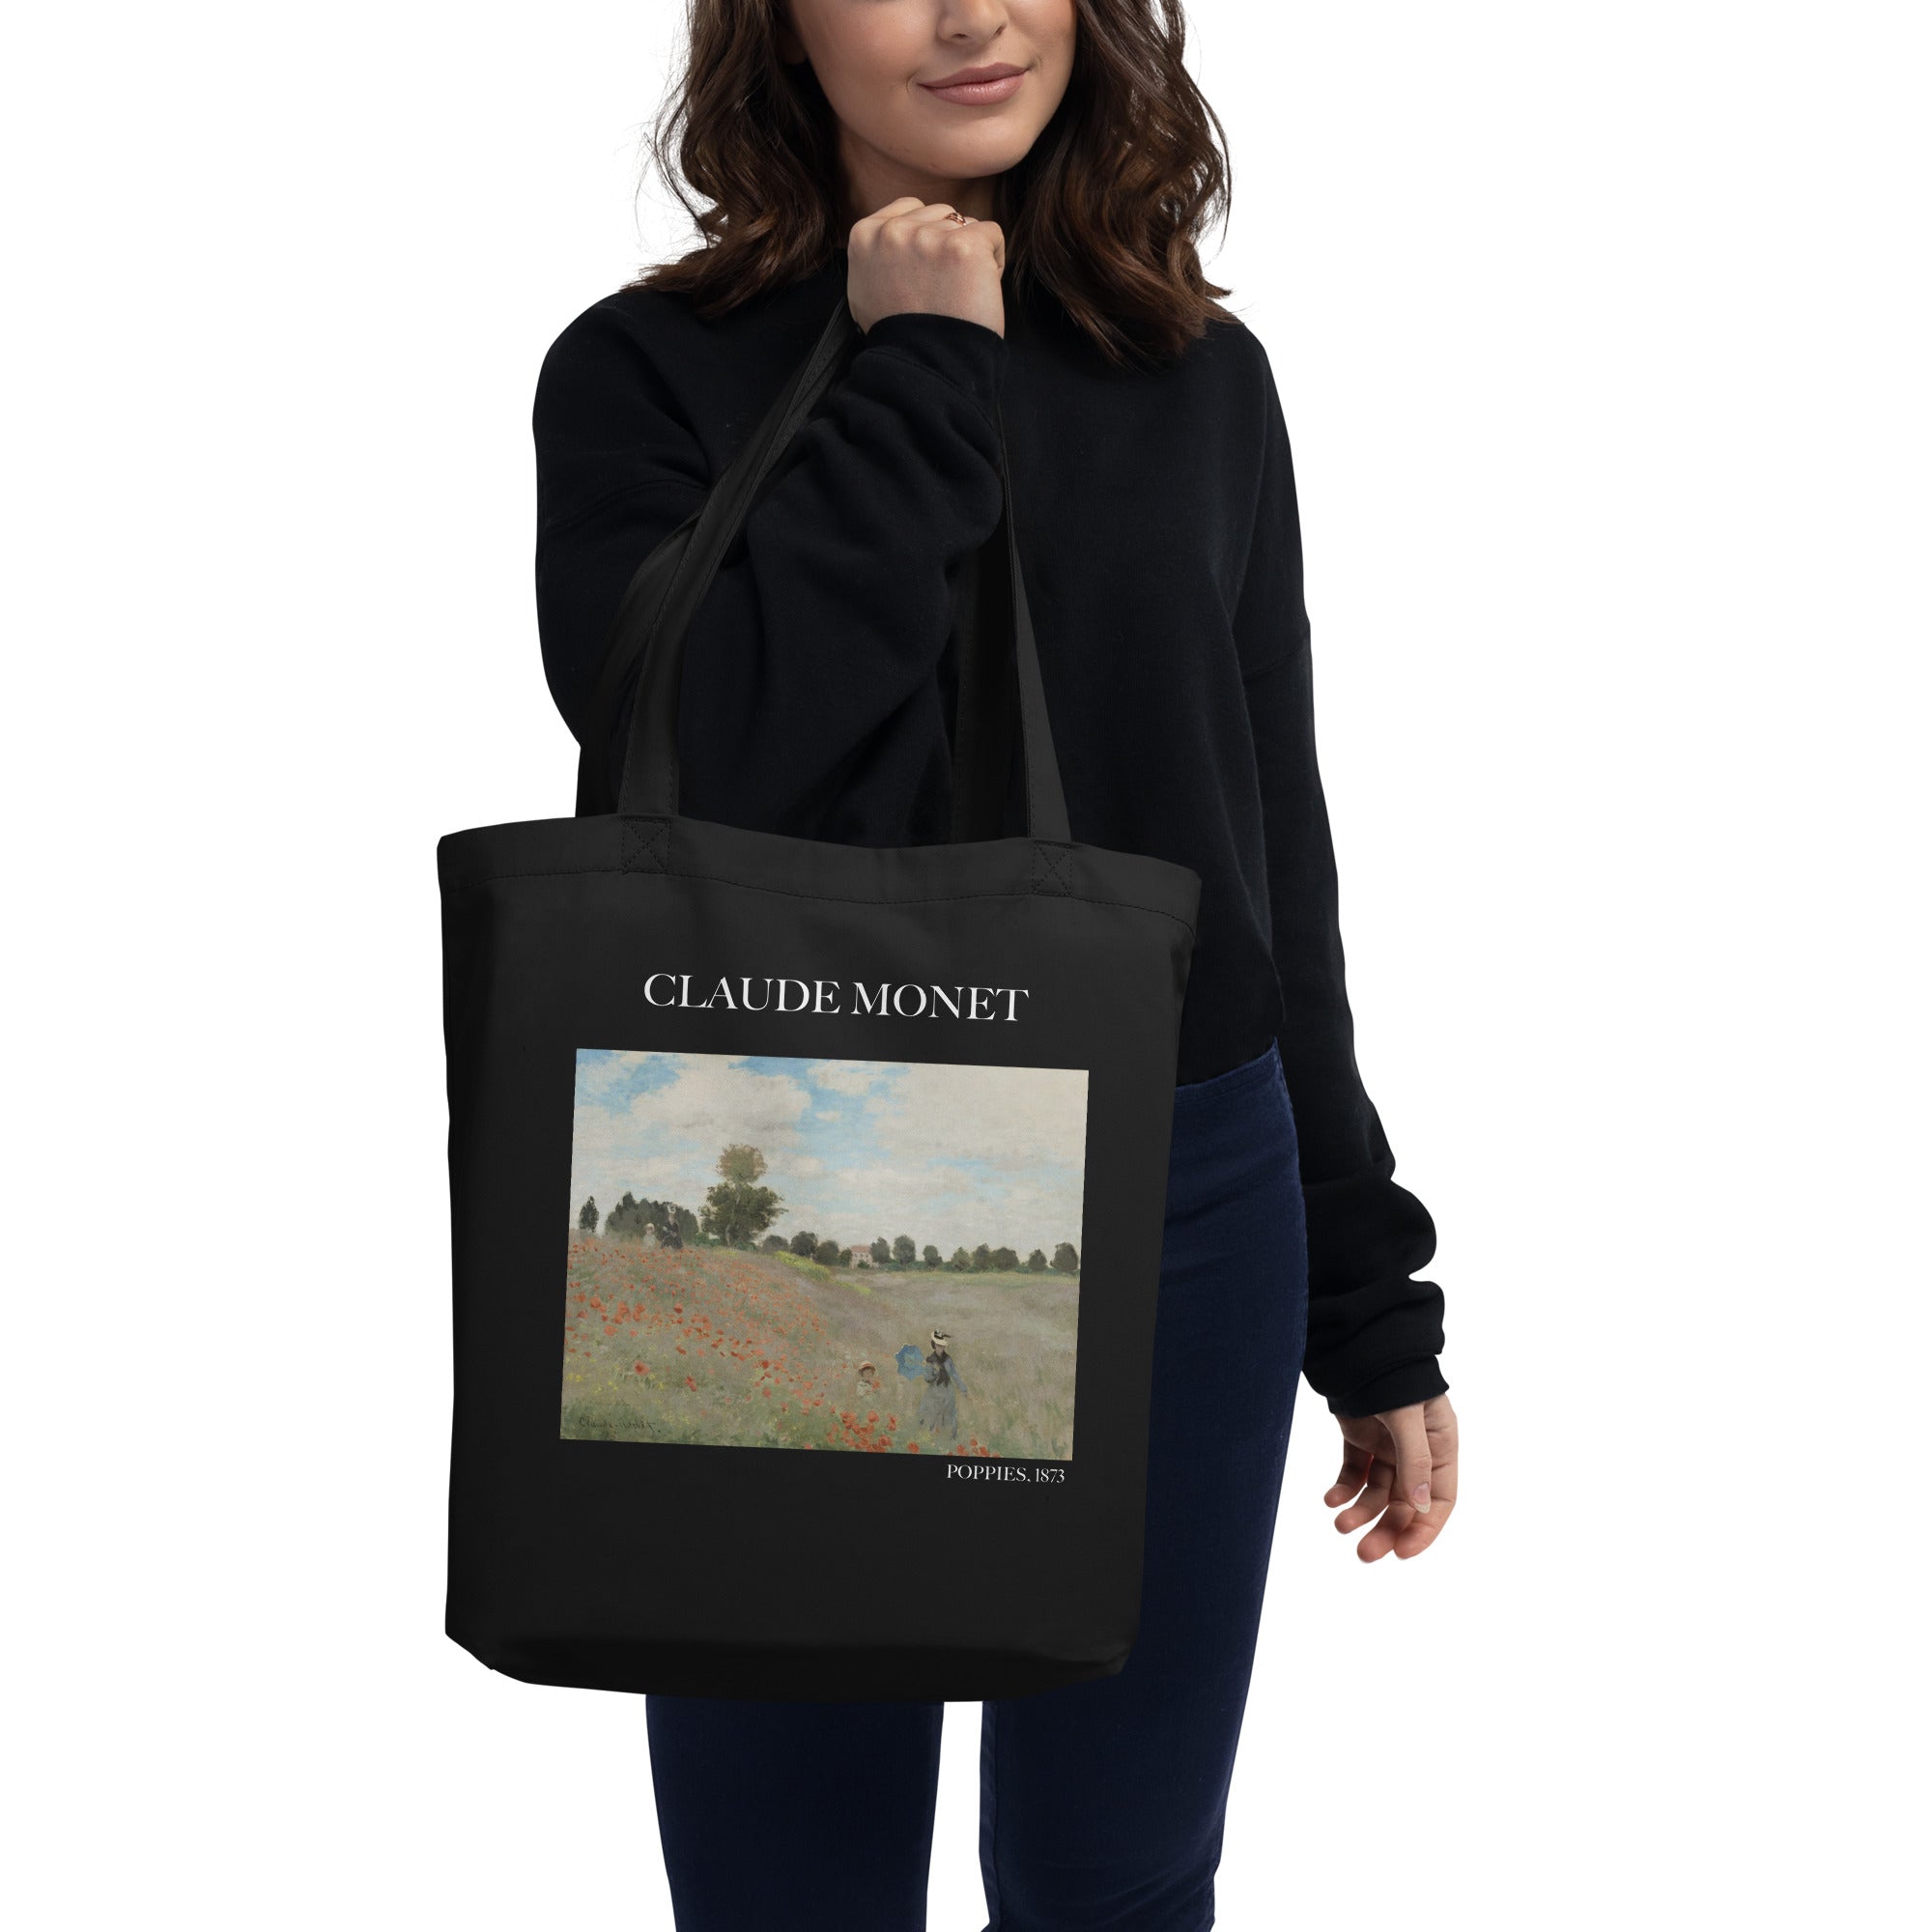 Claude Monet 'Poppies' Famous Painting Totebag | Eco Friendly Art Tote Bag